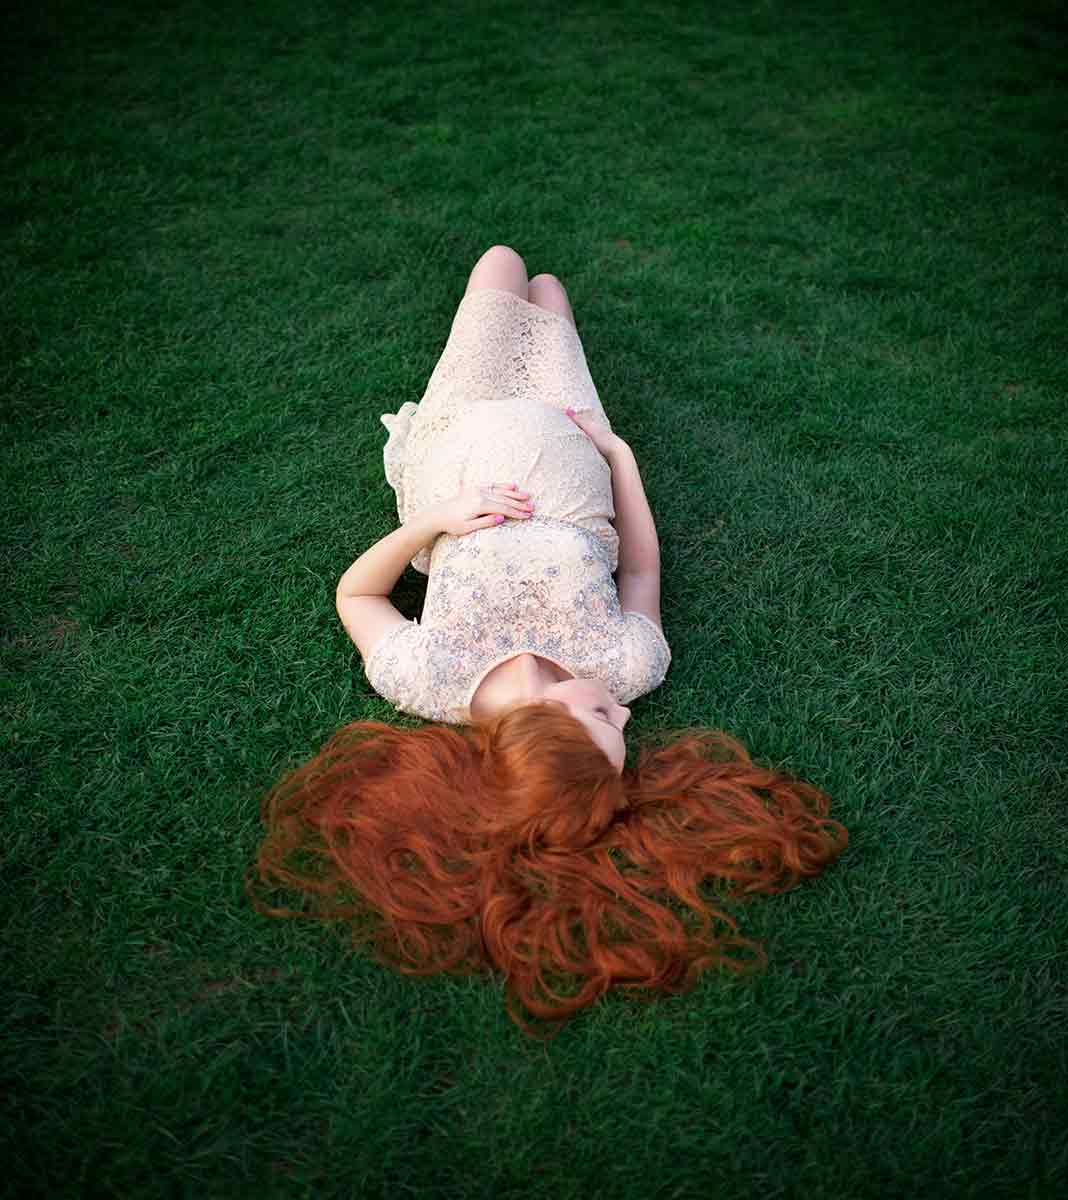 Pregnant woman with red hair laying in grass, cradling her belly.